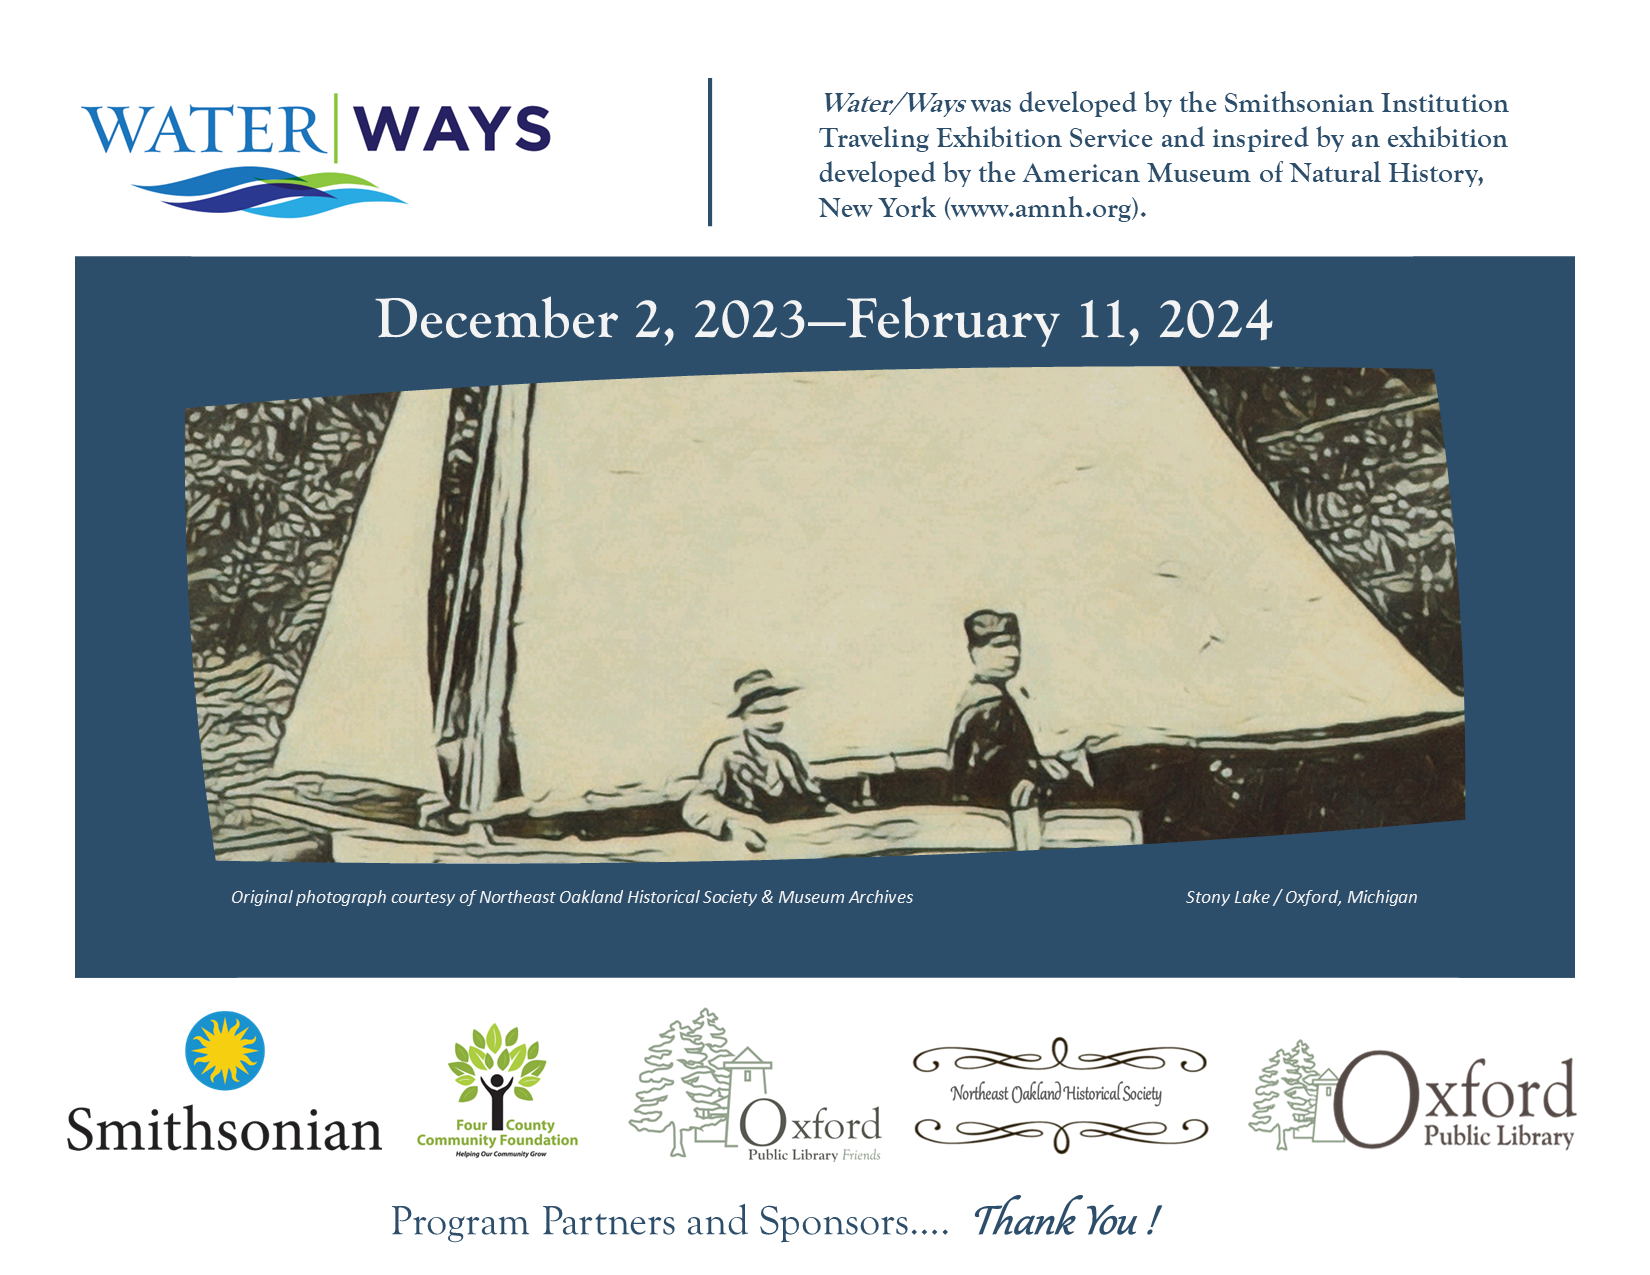 Water Ways graphic that reads "Water/Ways was developed by the Smithsonian Institution Traveling Exhibition Service and inspired by an exhibition developed by the American Museum of Natural History, New York (www.amnh.org). December 2, 2023—February 11, 2024 Oxford Public Library (MI) 530 Pontiac Street"